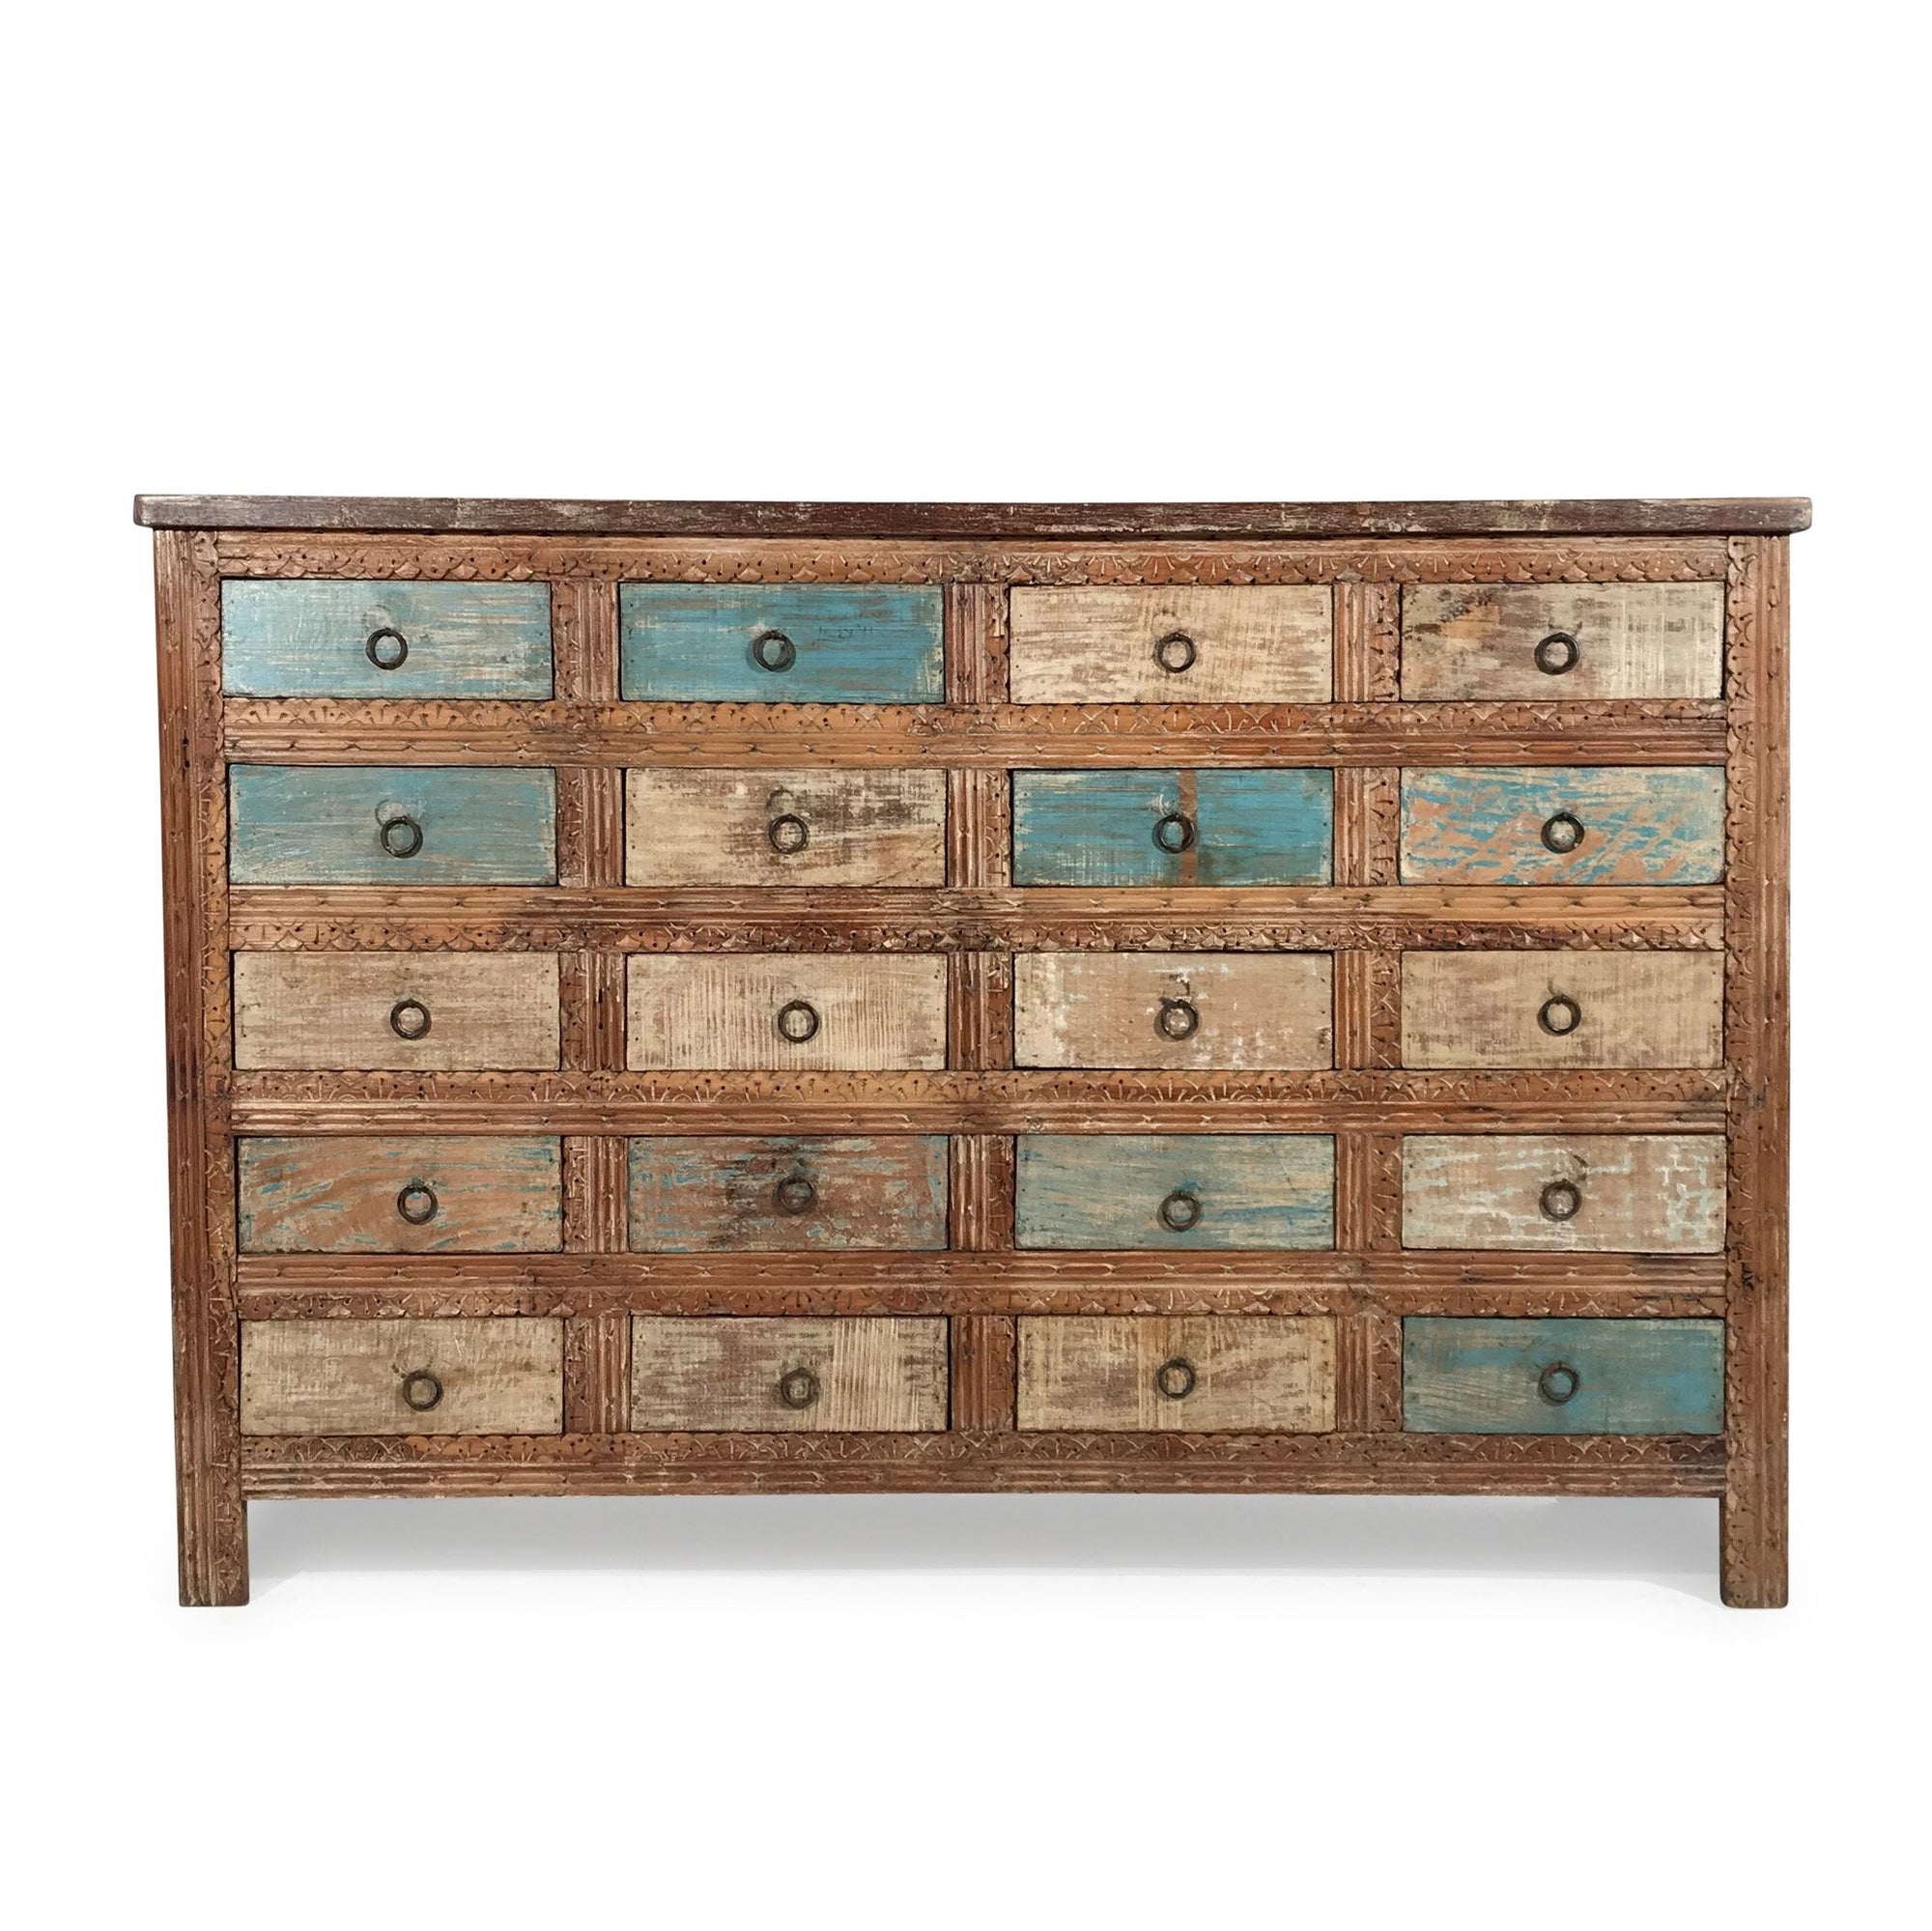 Reclaimed Teakwood Sideboard With 20 Drawers - 153 x 41 x 102 (wxdxh cms) - A6221